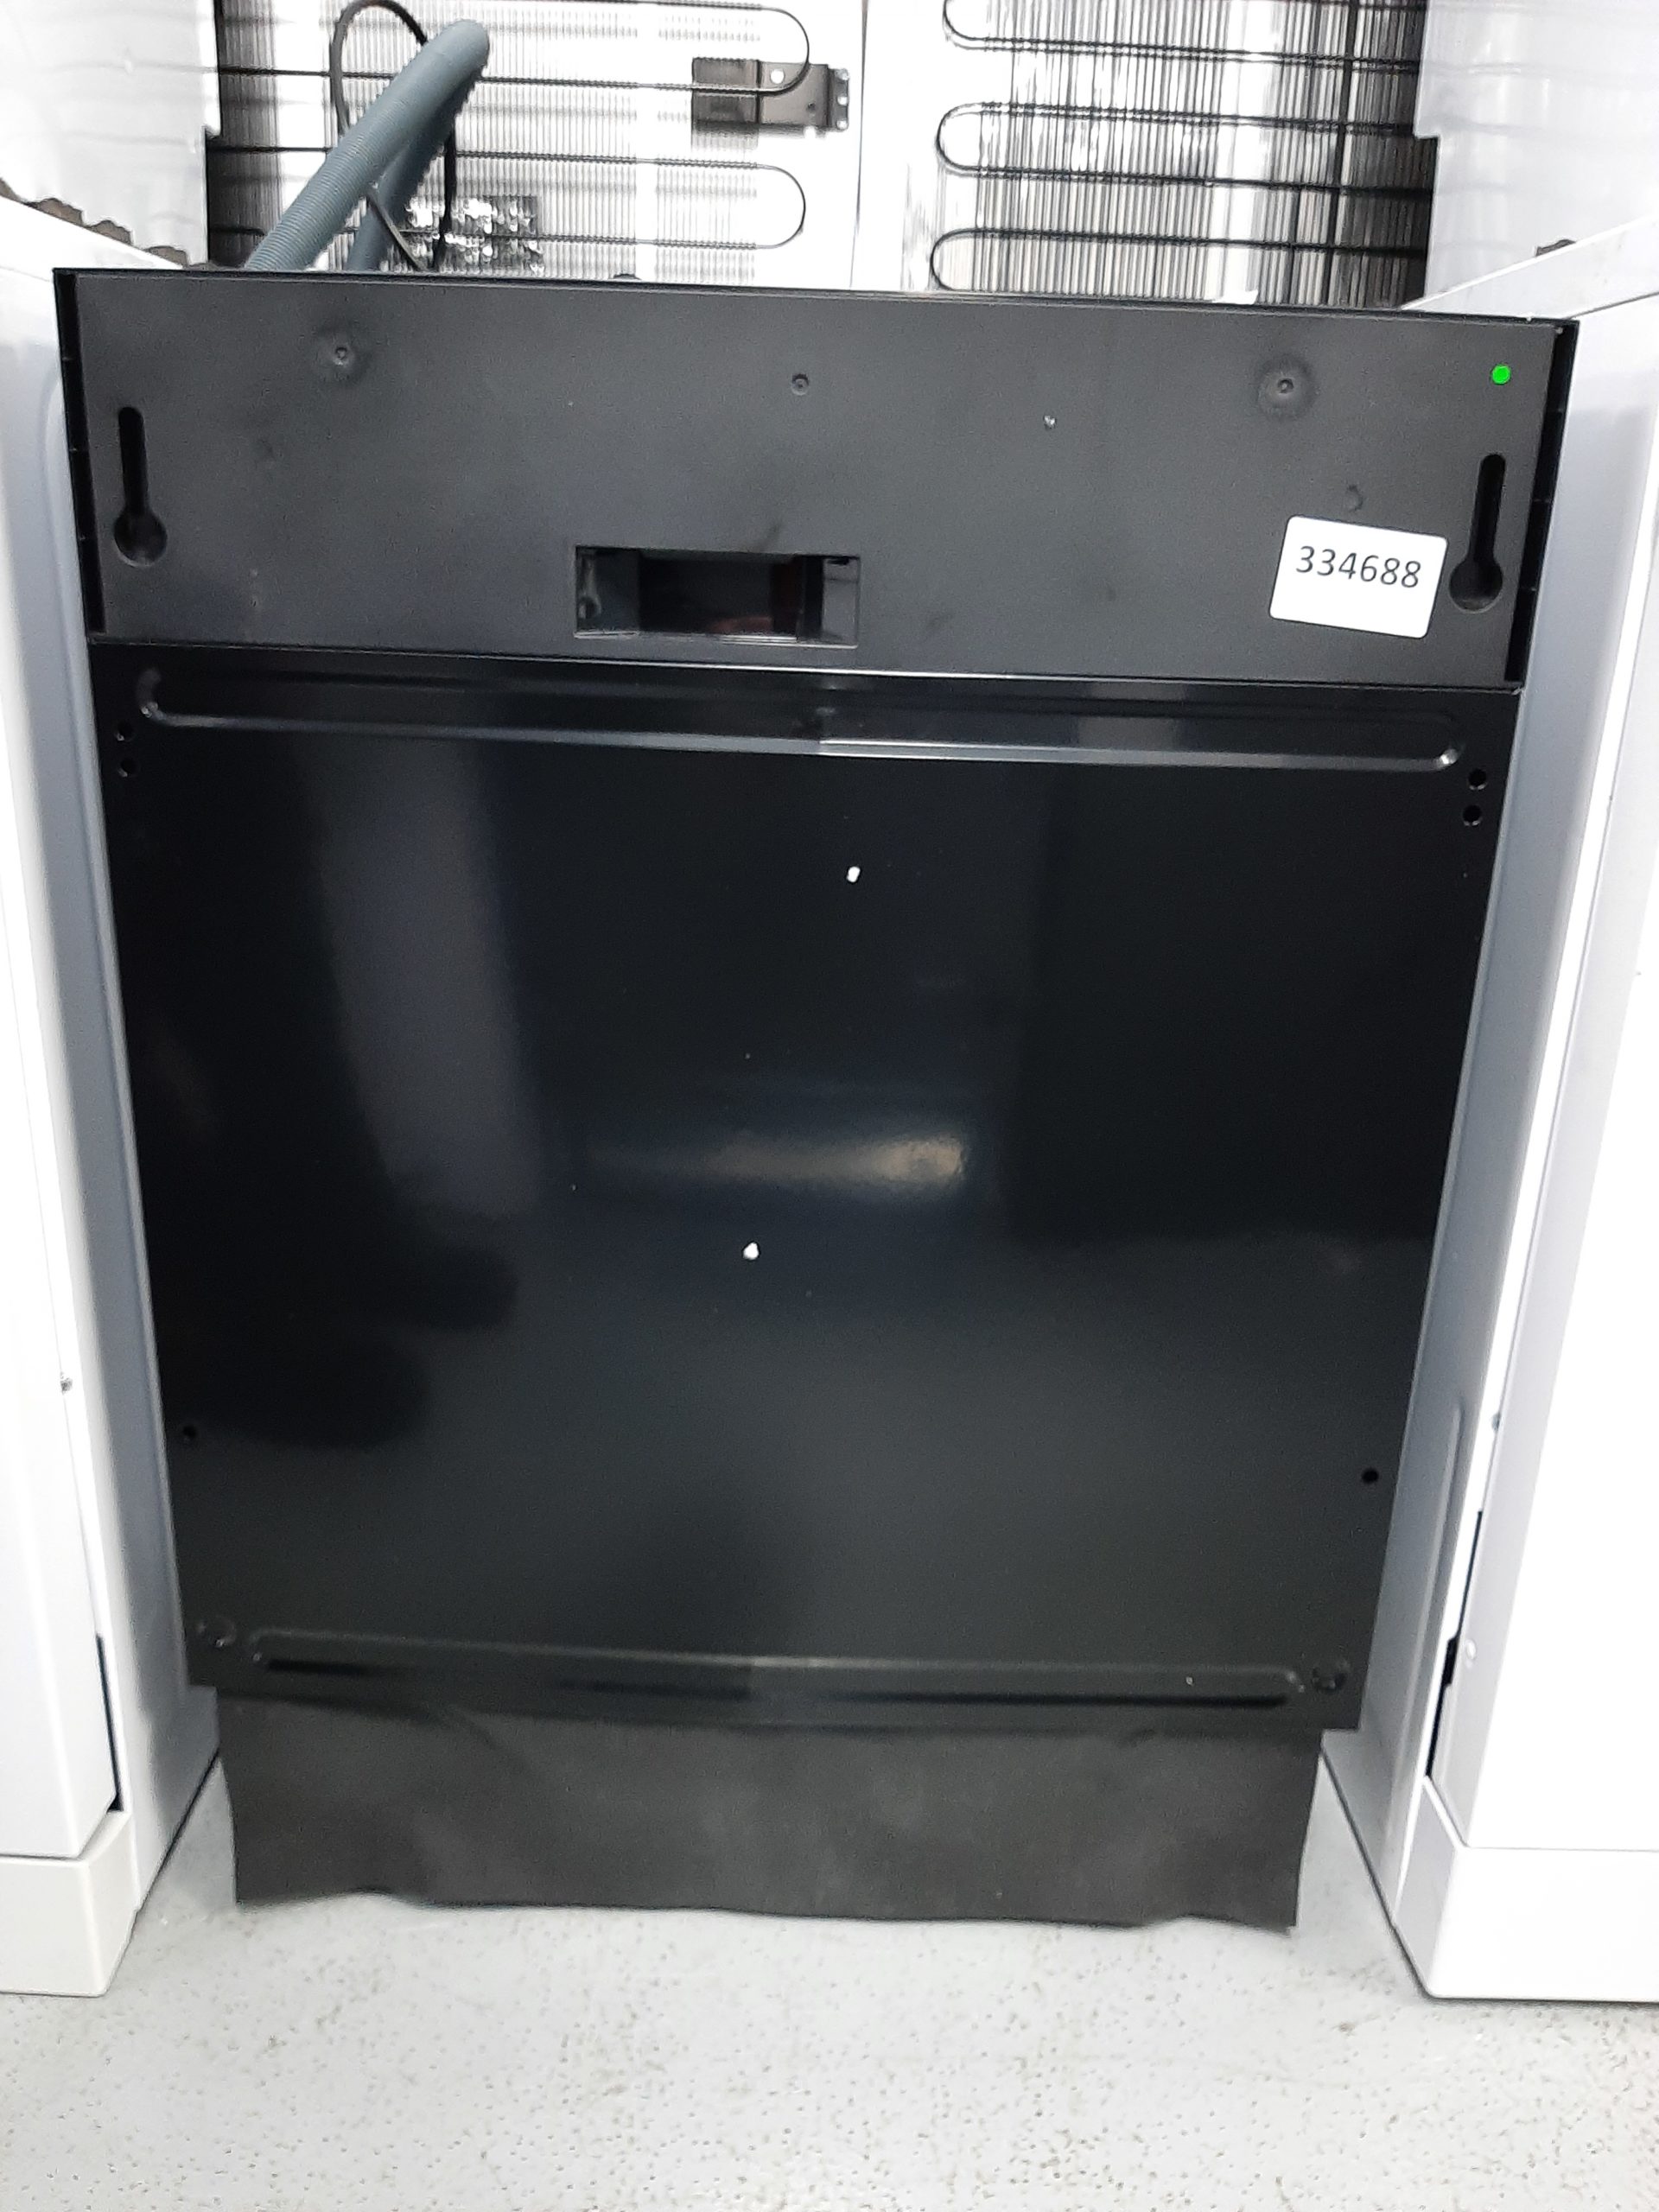 Hisense HV603D40UK Fully Integrated Standard Dishwasher - Black Control Panel with Fixed Door 